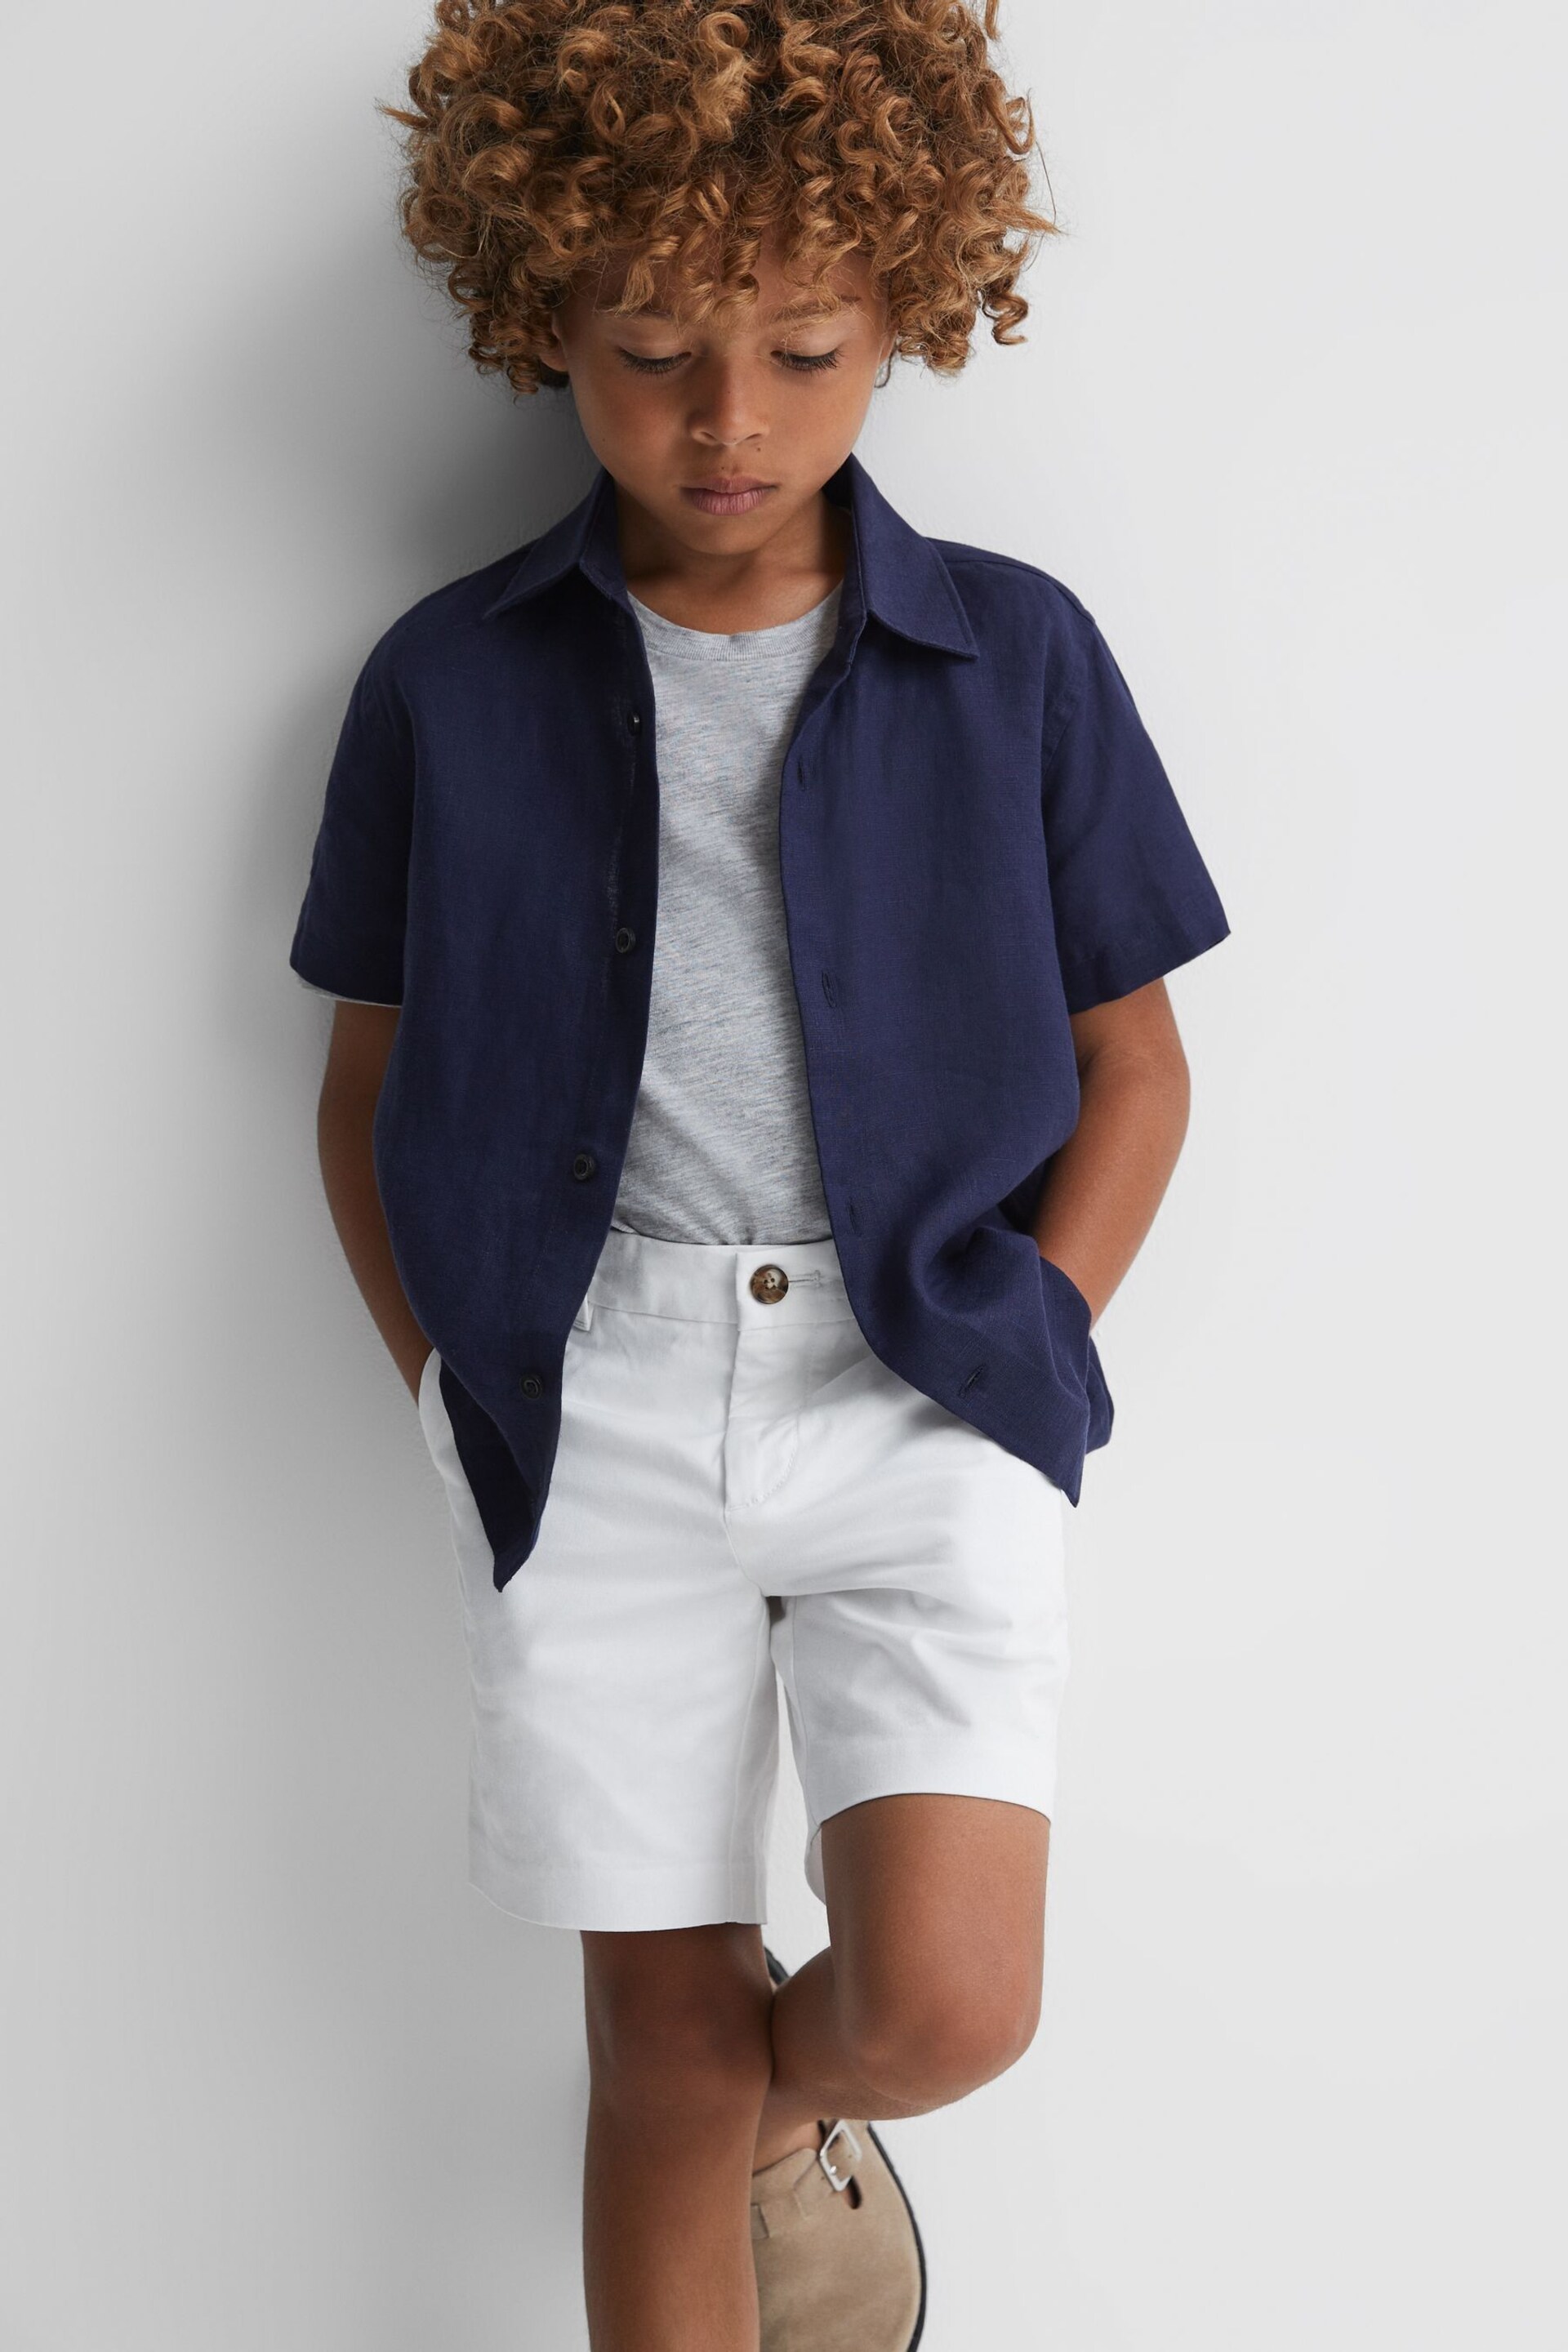 Reiss White Wicket Junior Casual Chino Shorts - Image 1 of 6